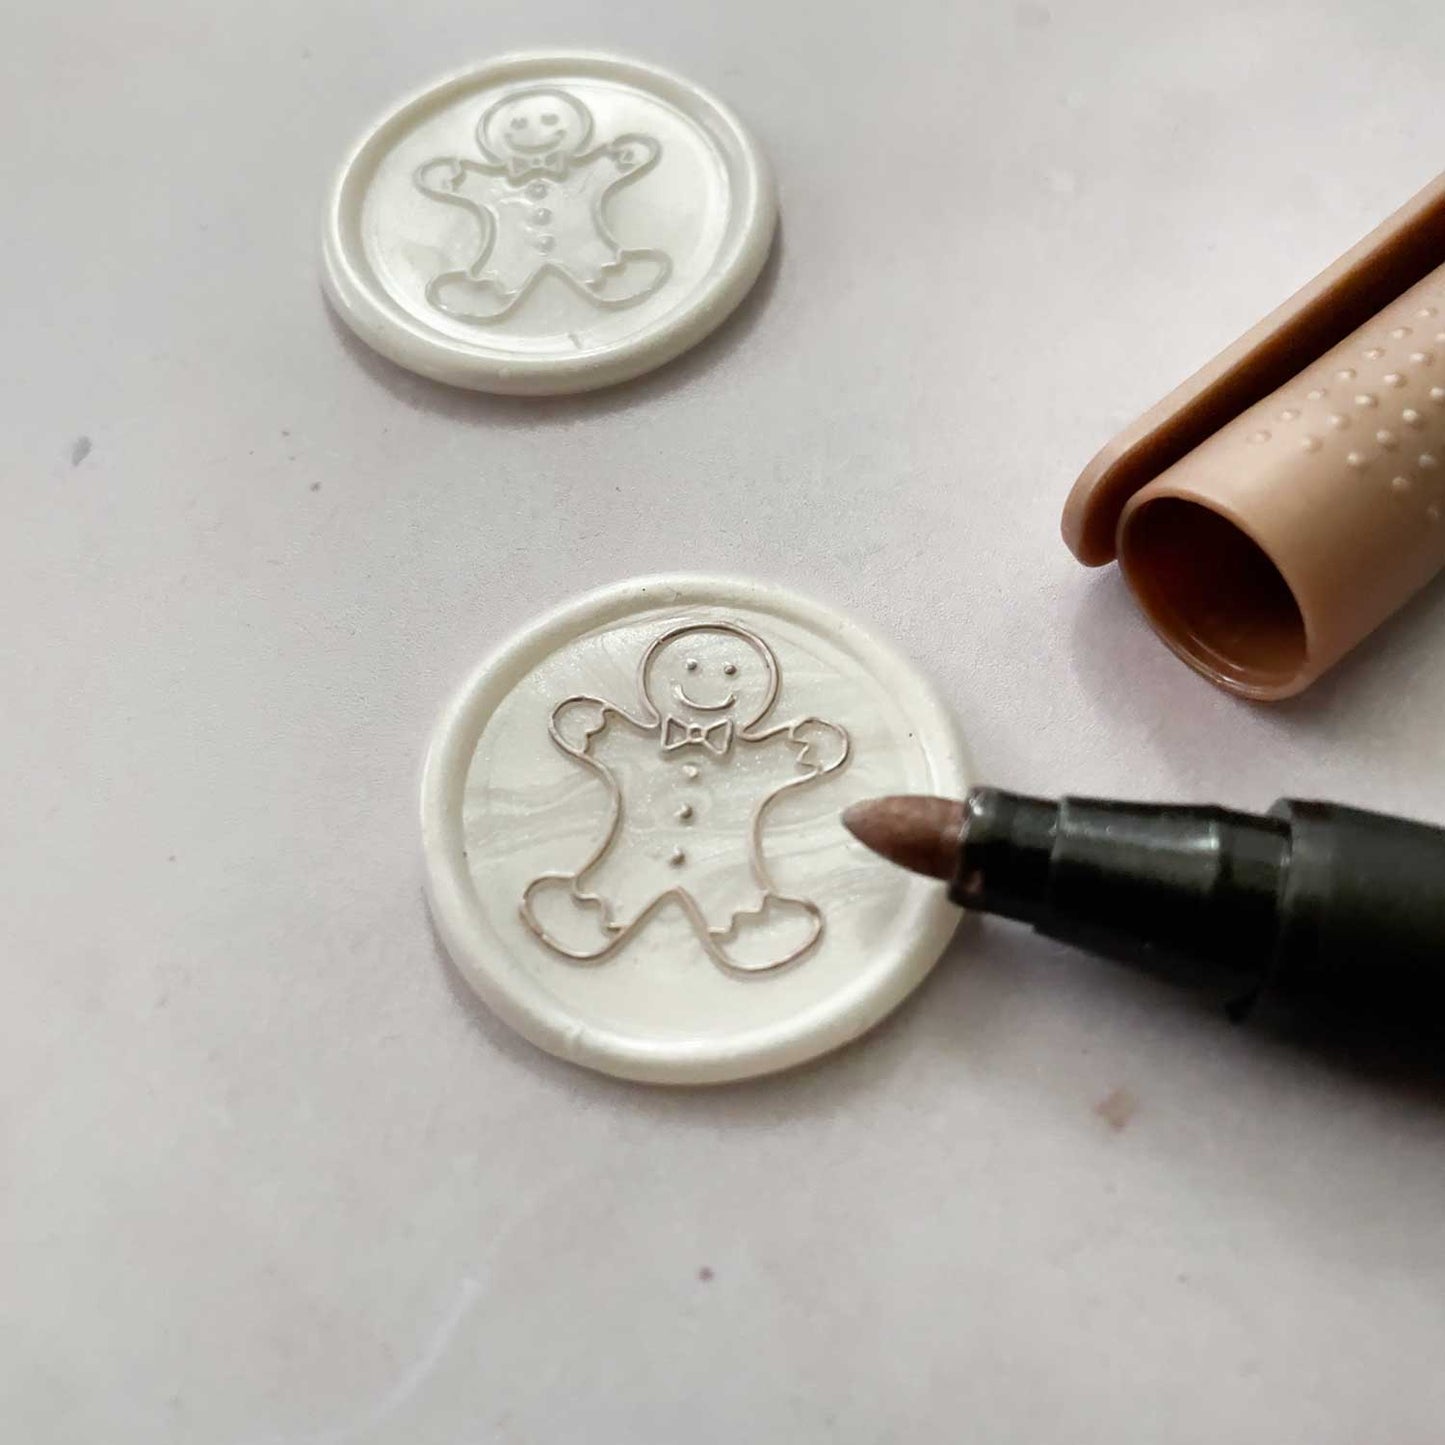 Wax seal marker in metallic champagne gold.  Highlighter pen to add details to wax seals.  By The Natural Paper Company